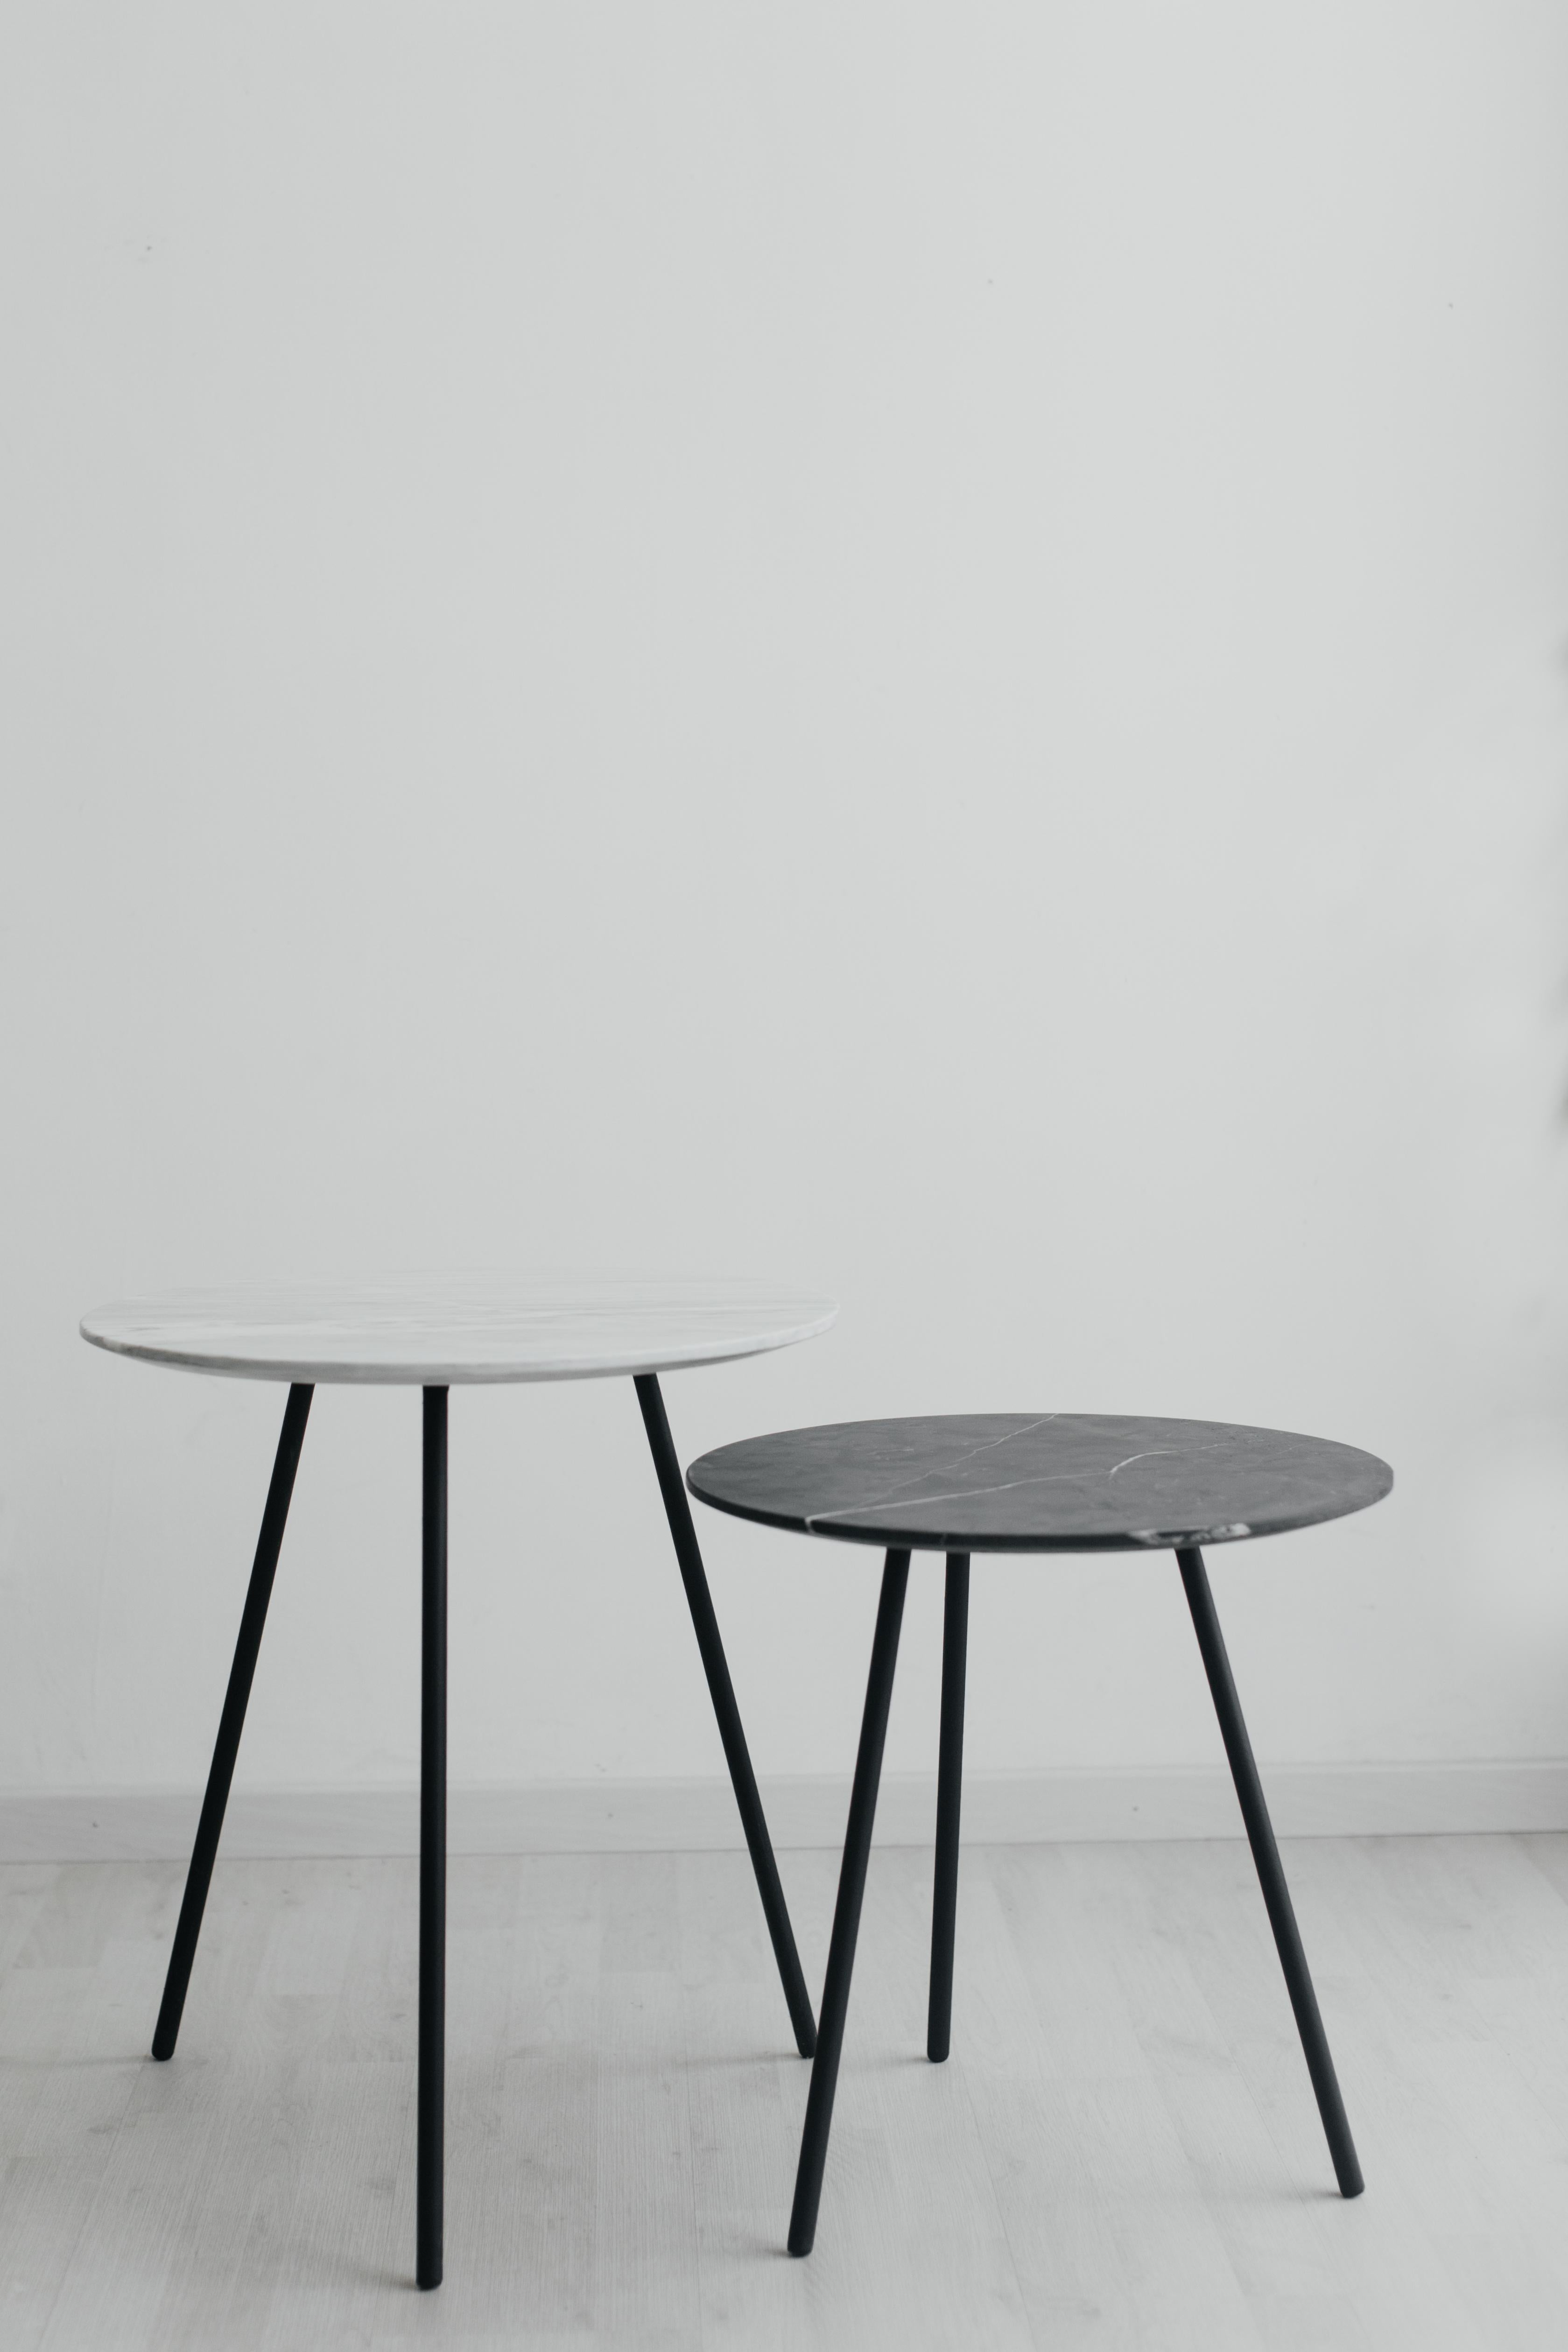 Inspired by the Moray archaeological site in Peru, the Moray side table is expressed in various heights to diversify its uses. A concentric and versatile table composed of a steel structure in electrostatic paint and matte finish marble cover.